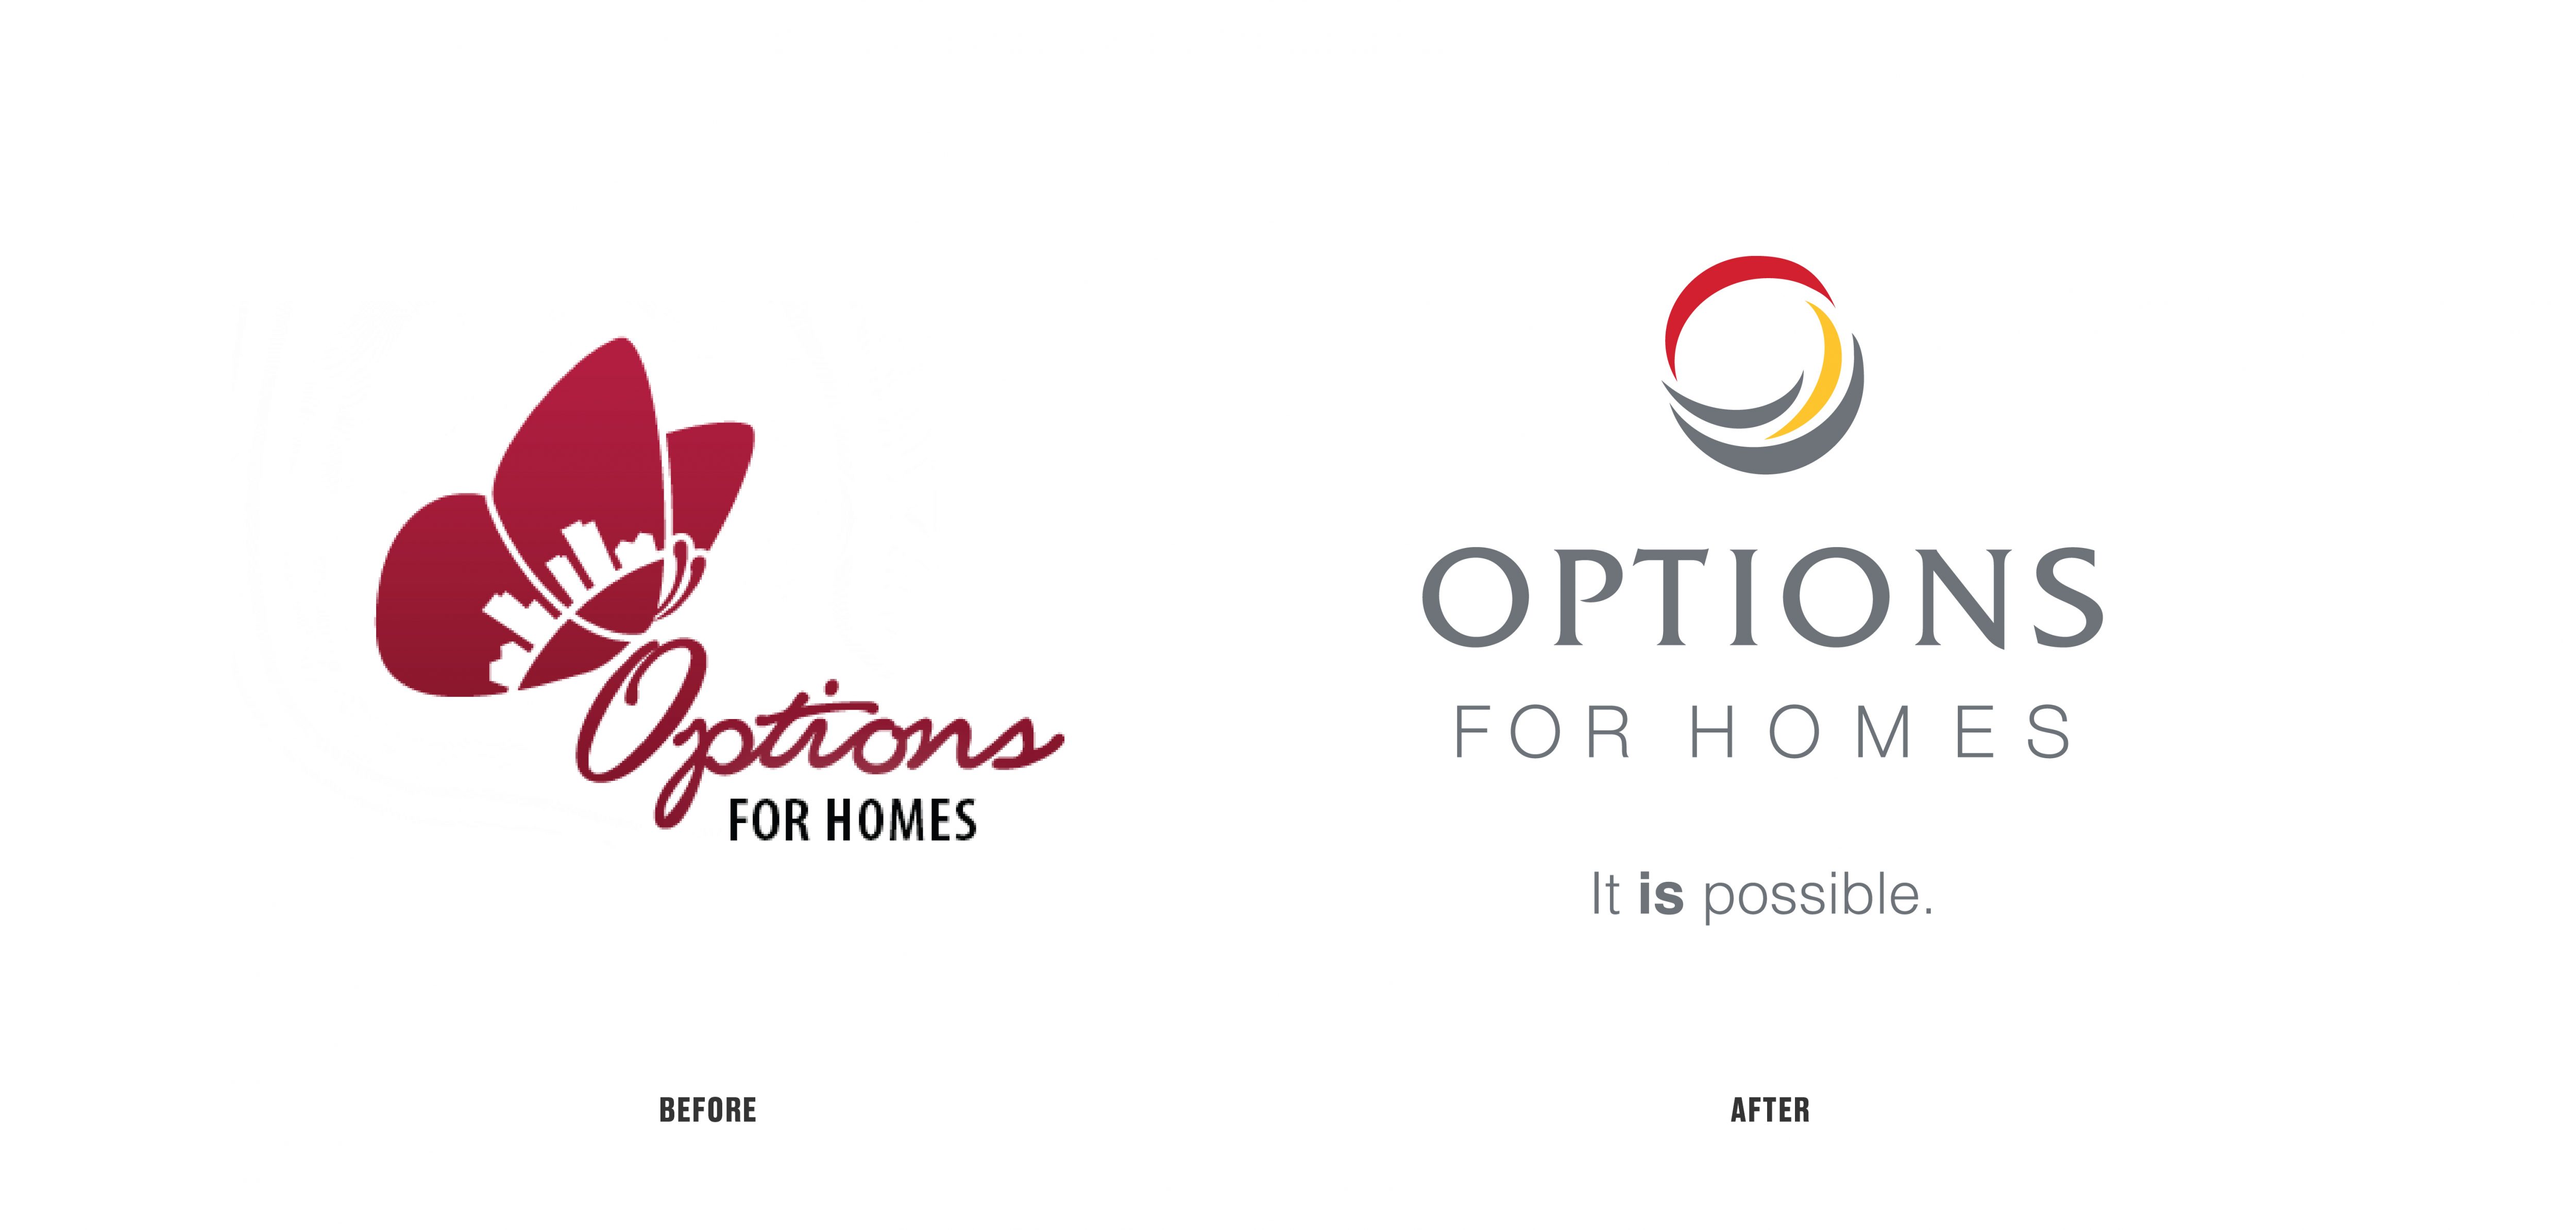 Options for Homes before logo has an butterfly on it and the after logo stylize the 